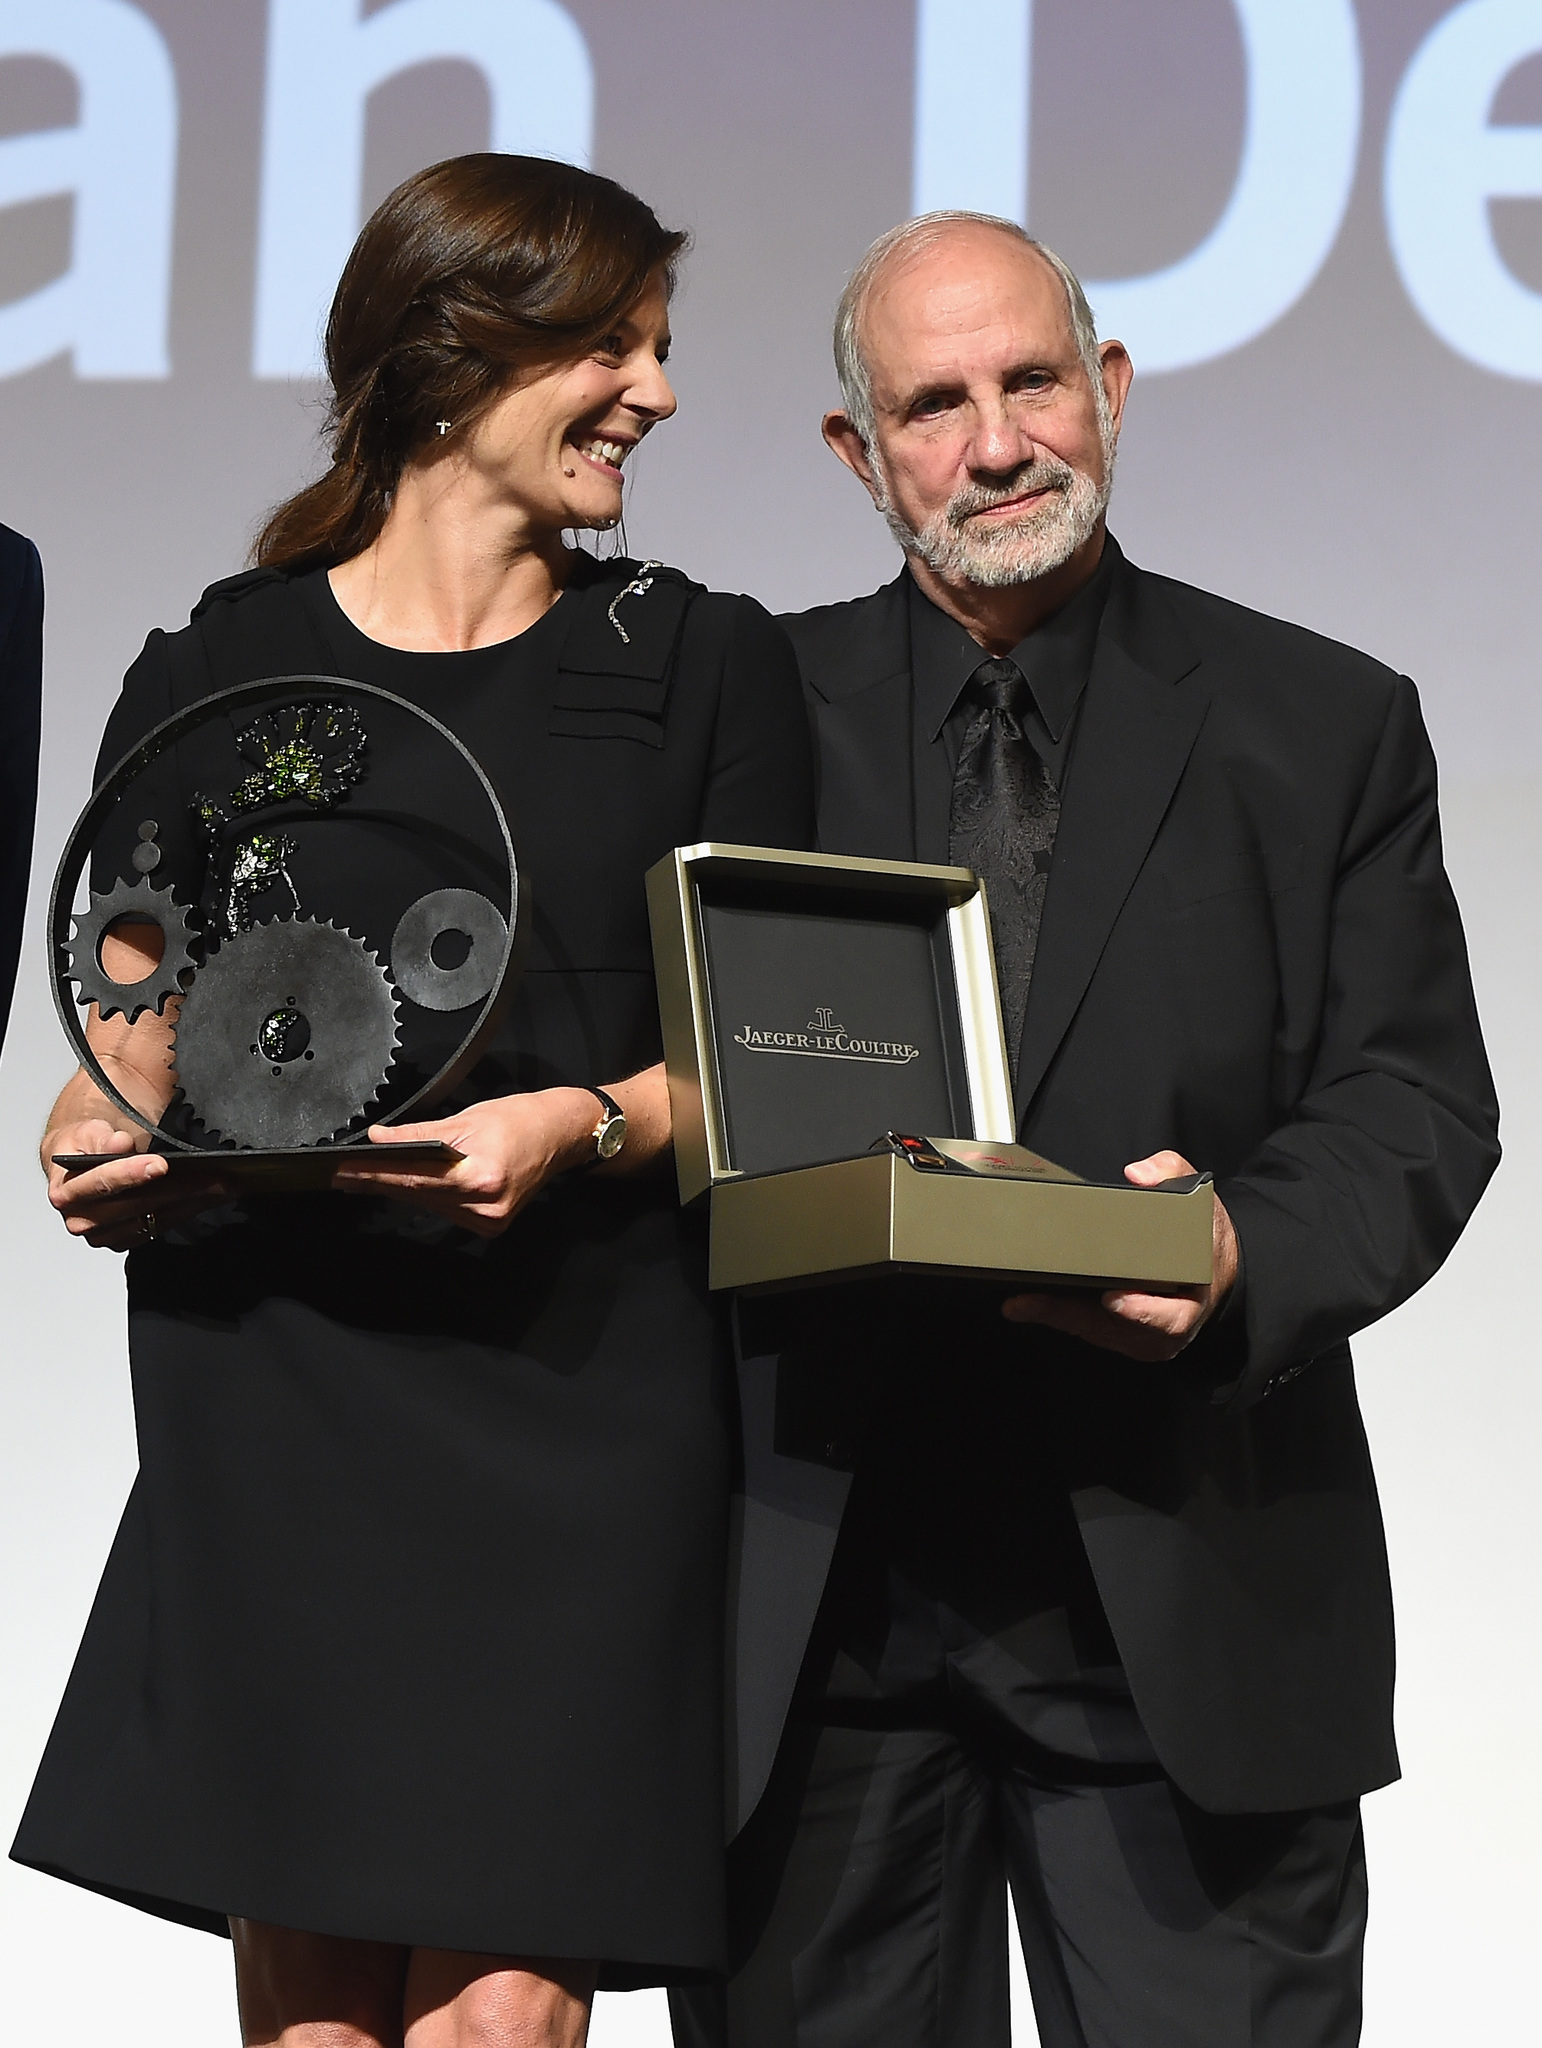 Chiara Mastroianni and Brian De Palma at the Jaeger-LeCoultre Glory to the Filmmaker 2015 Award Ceremony during the 72nd Venice Film Festival.